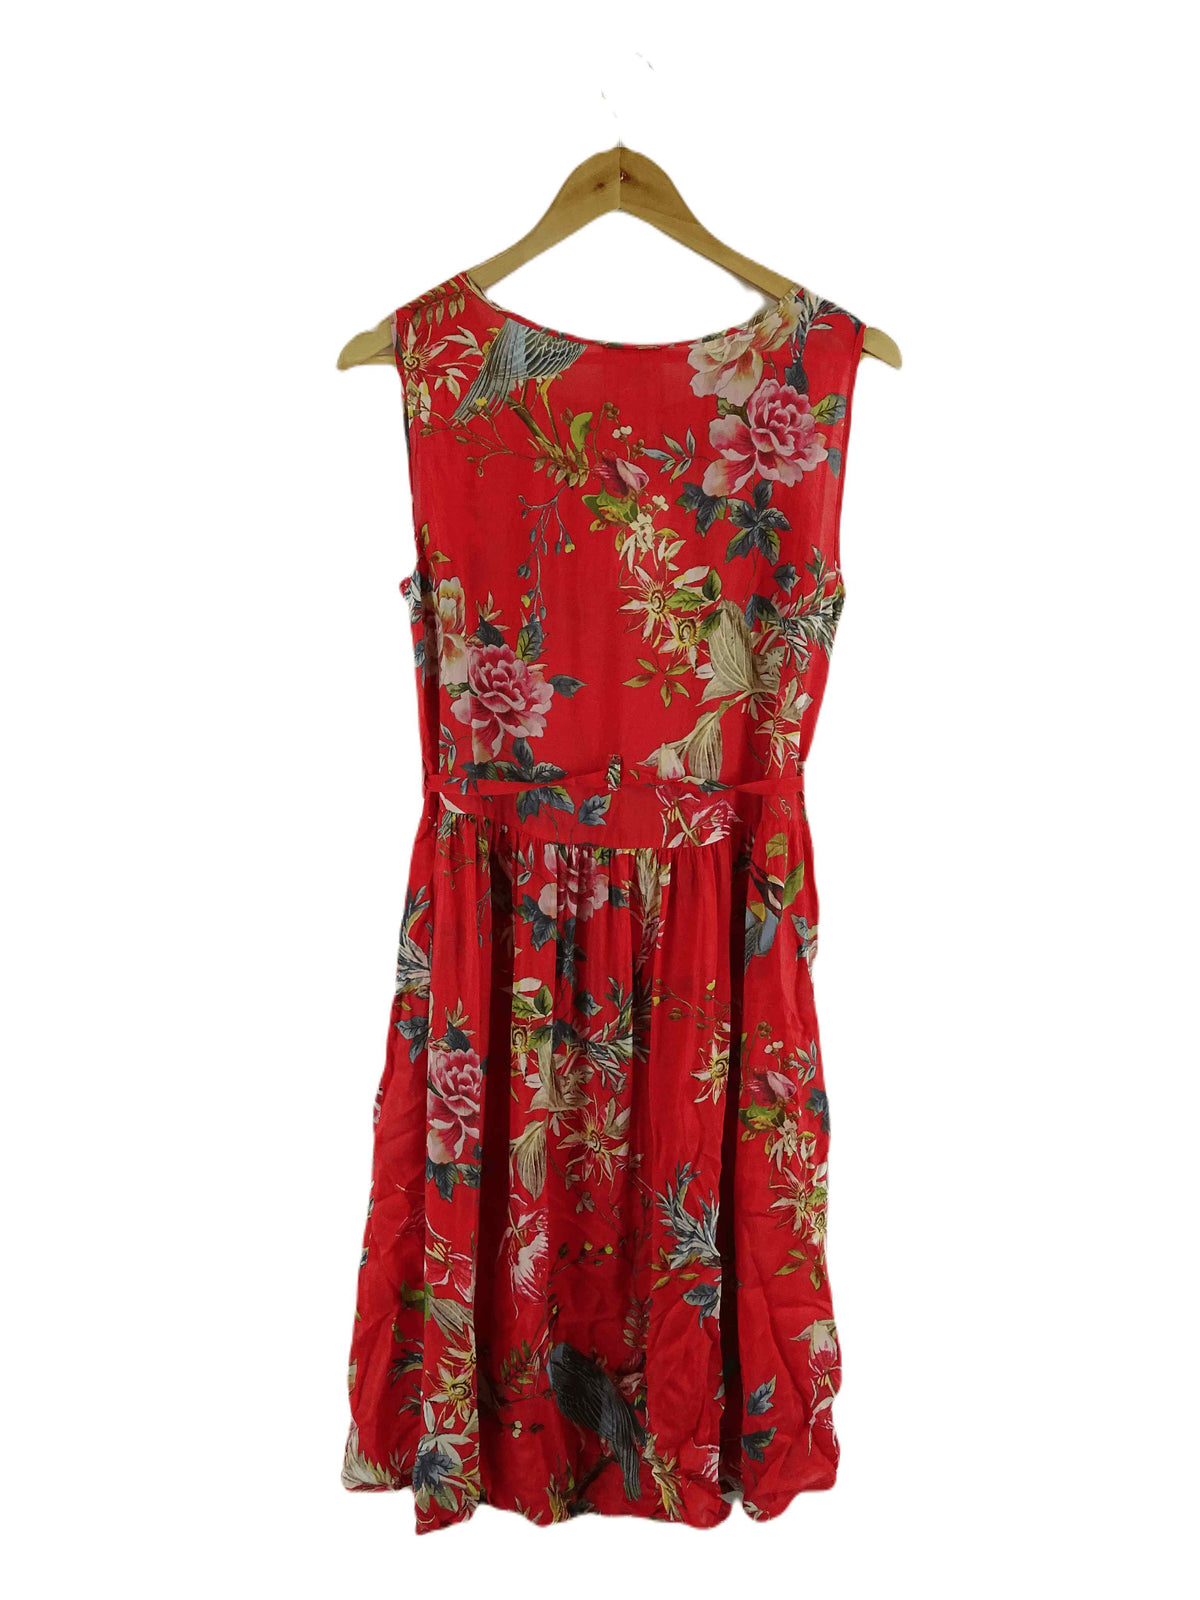 Johnny Was Red Floral Dress S